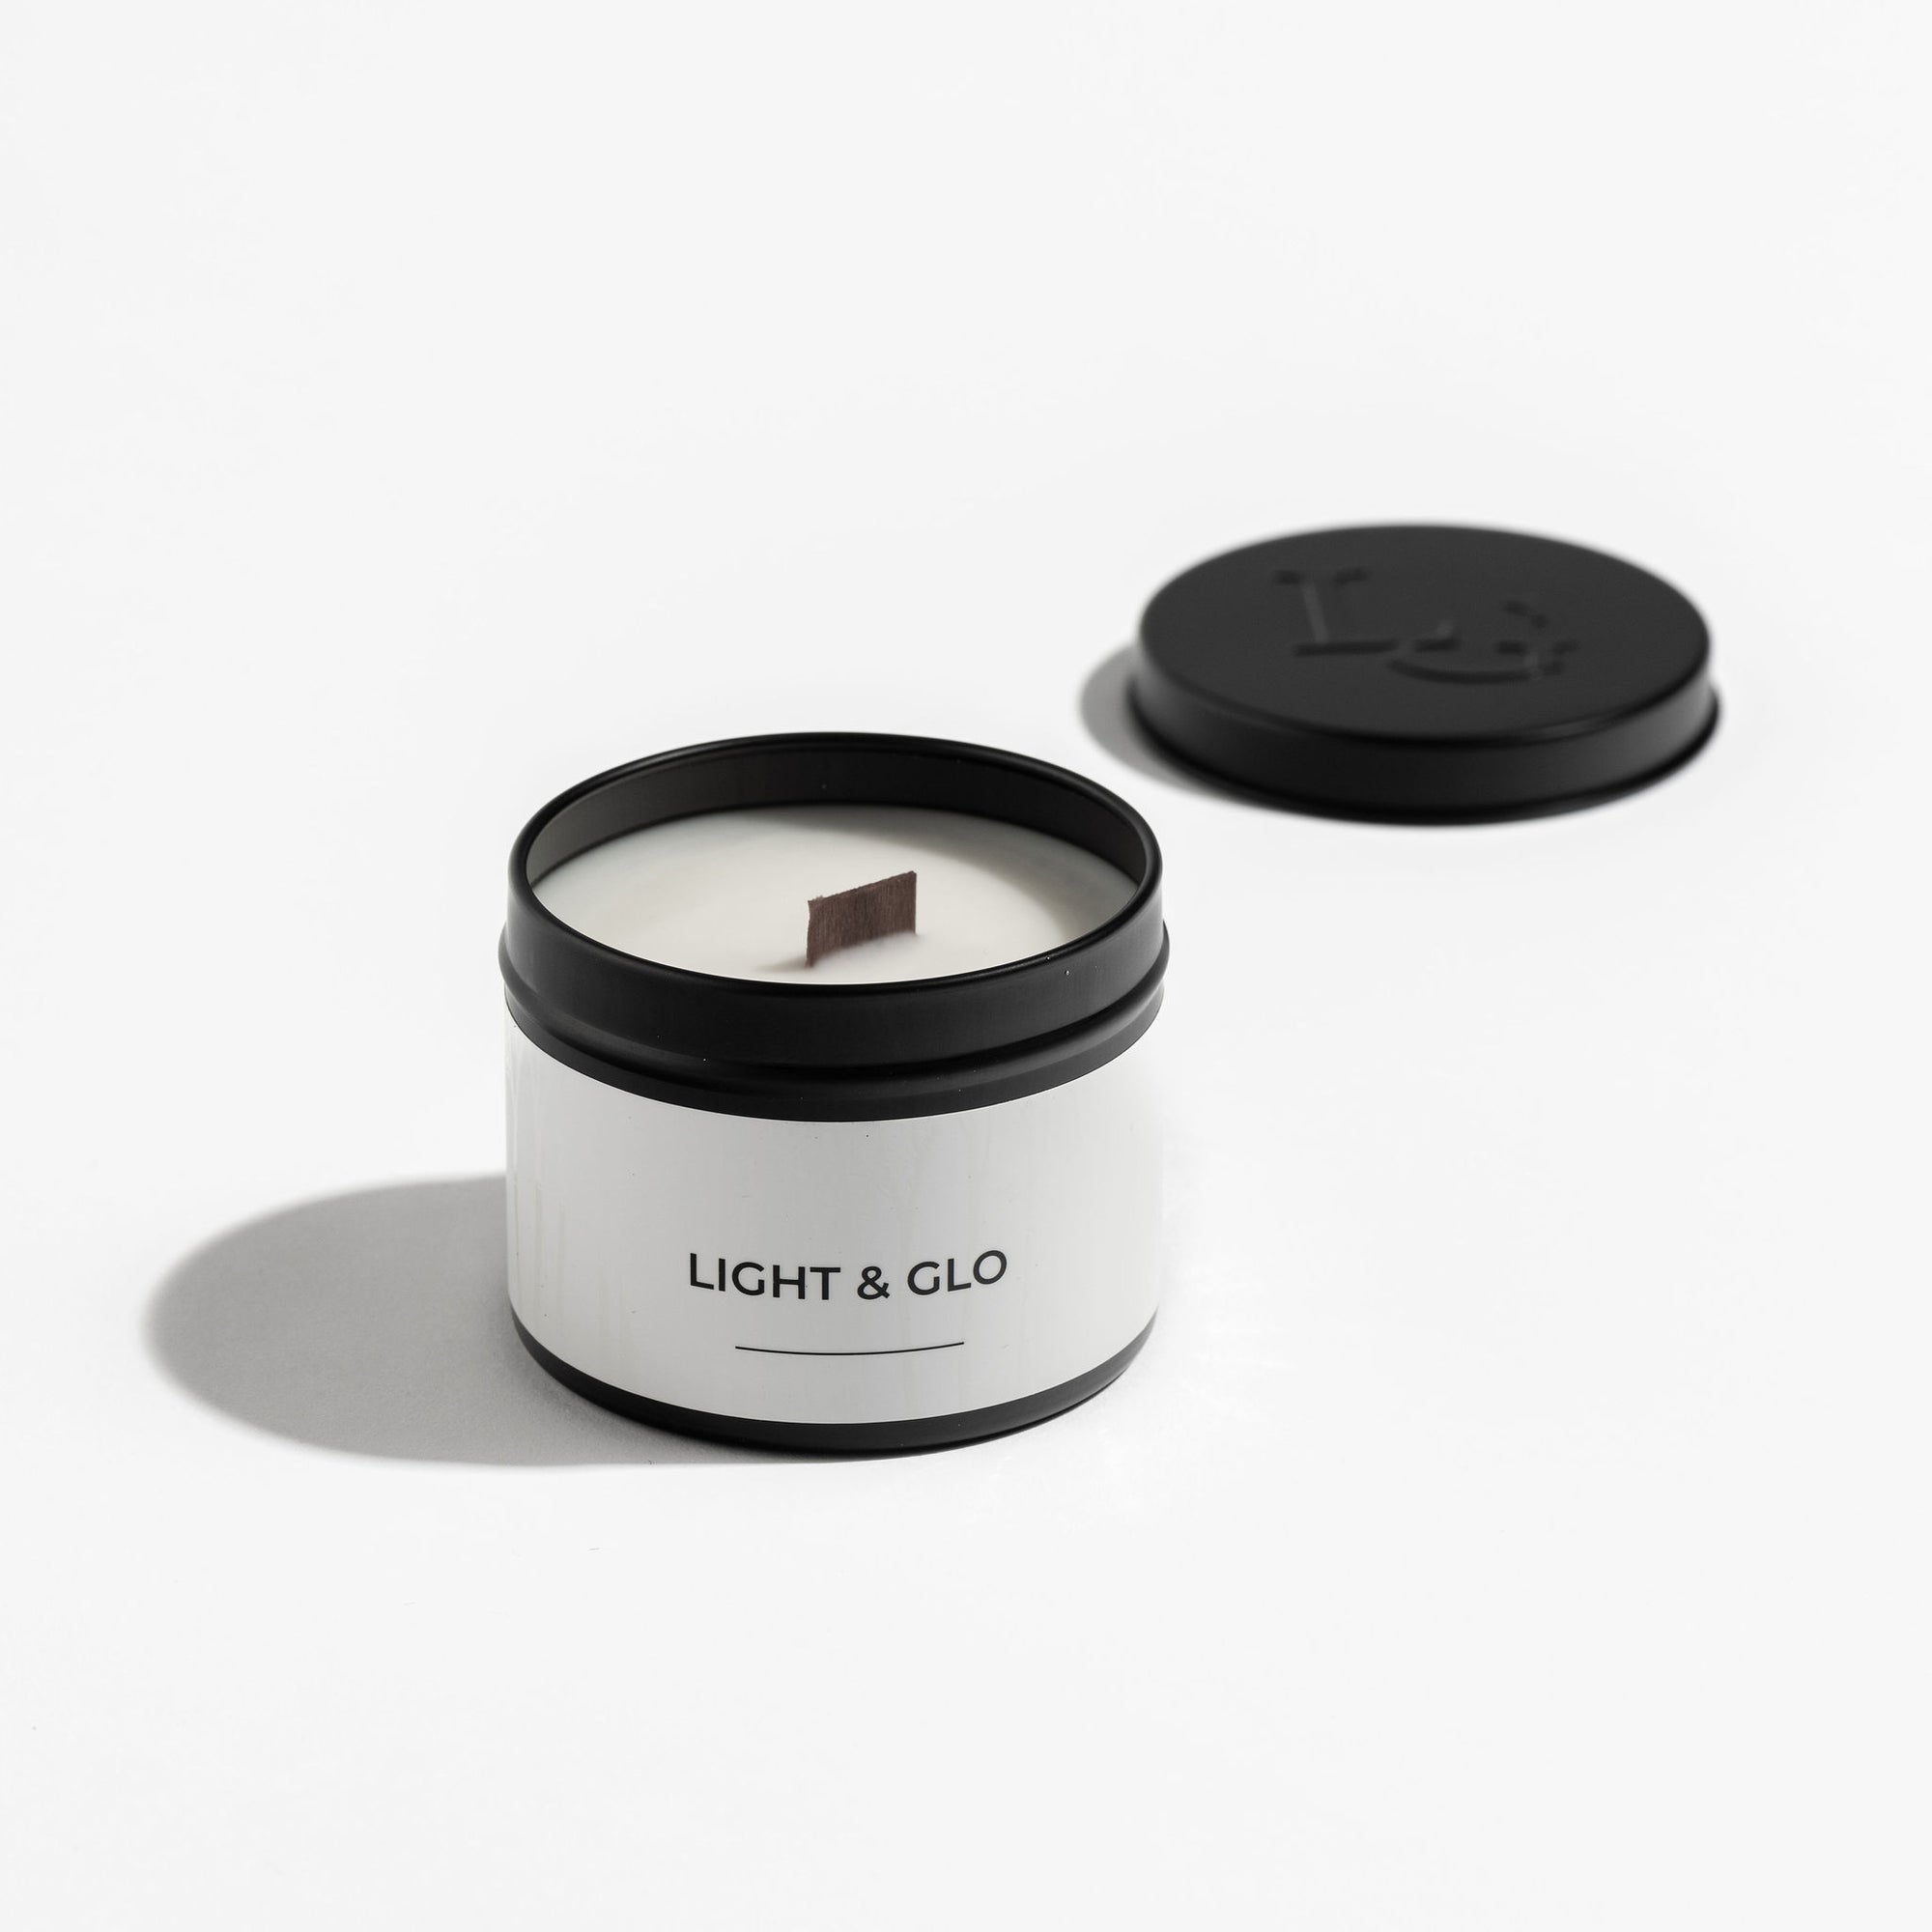 Japanese Honeysuckle - Monochrome Travel Candle | Luxury Candles & Home Fragrances by Light + Glo